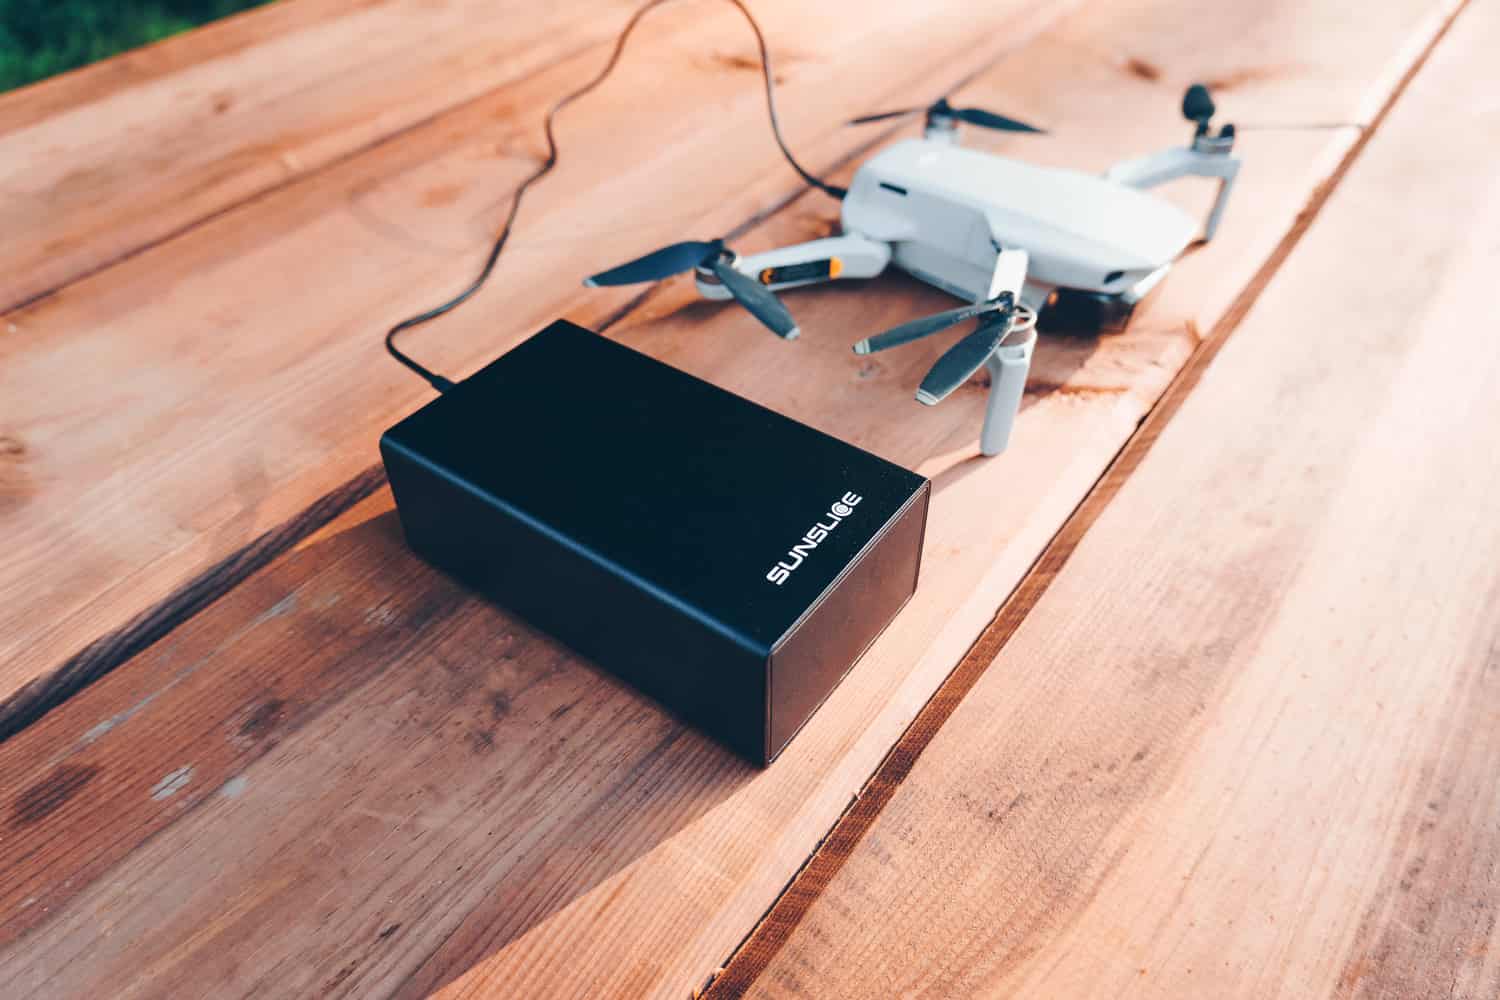 gravity40 external battery 100 w power bank loading a drone on a table